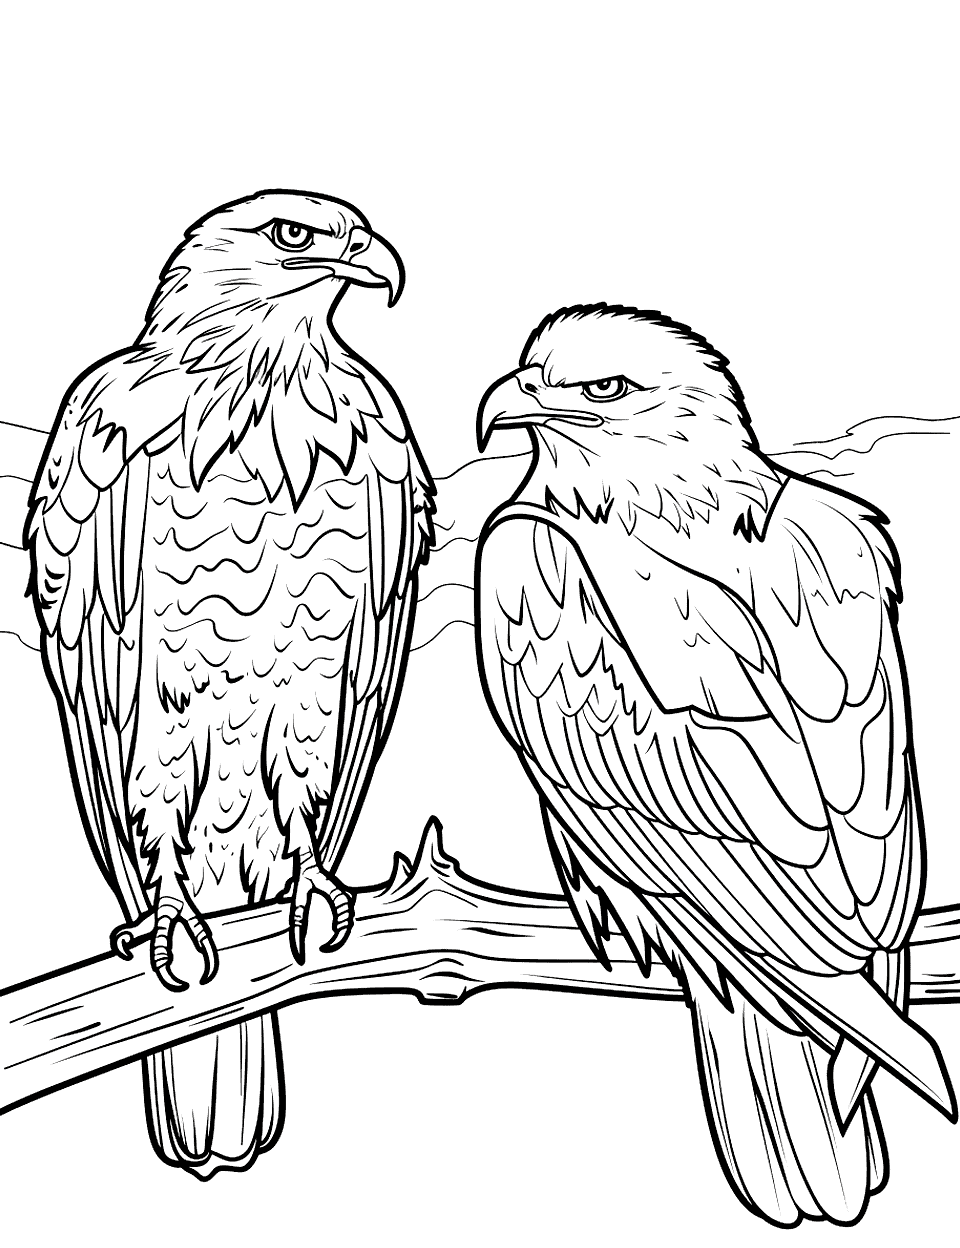 Friendly Bird Meeting Eagle Coloring Page - Two eagles perched side by side on a tree branch, share a peaceful moment.